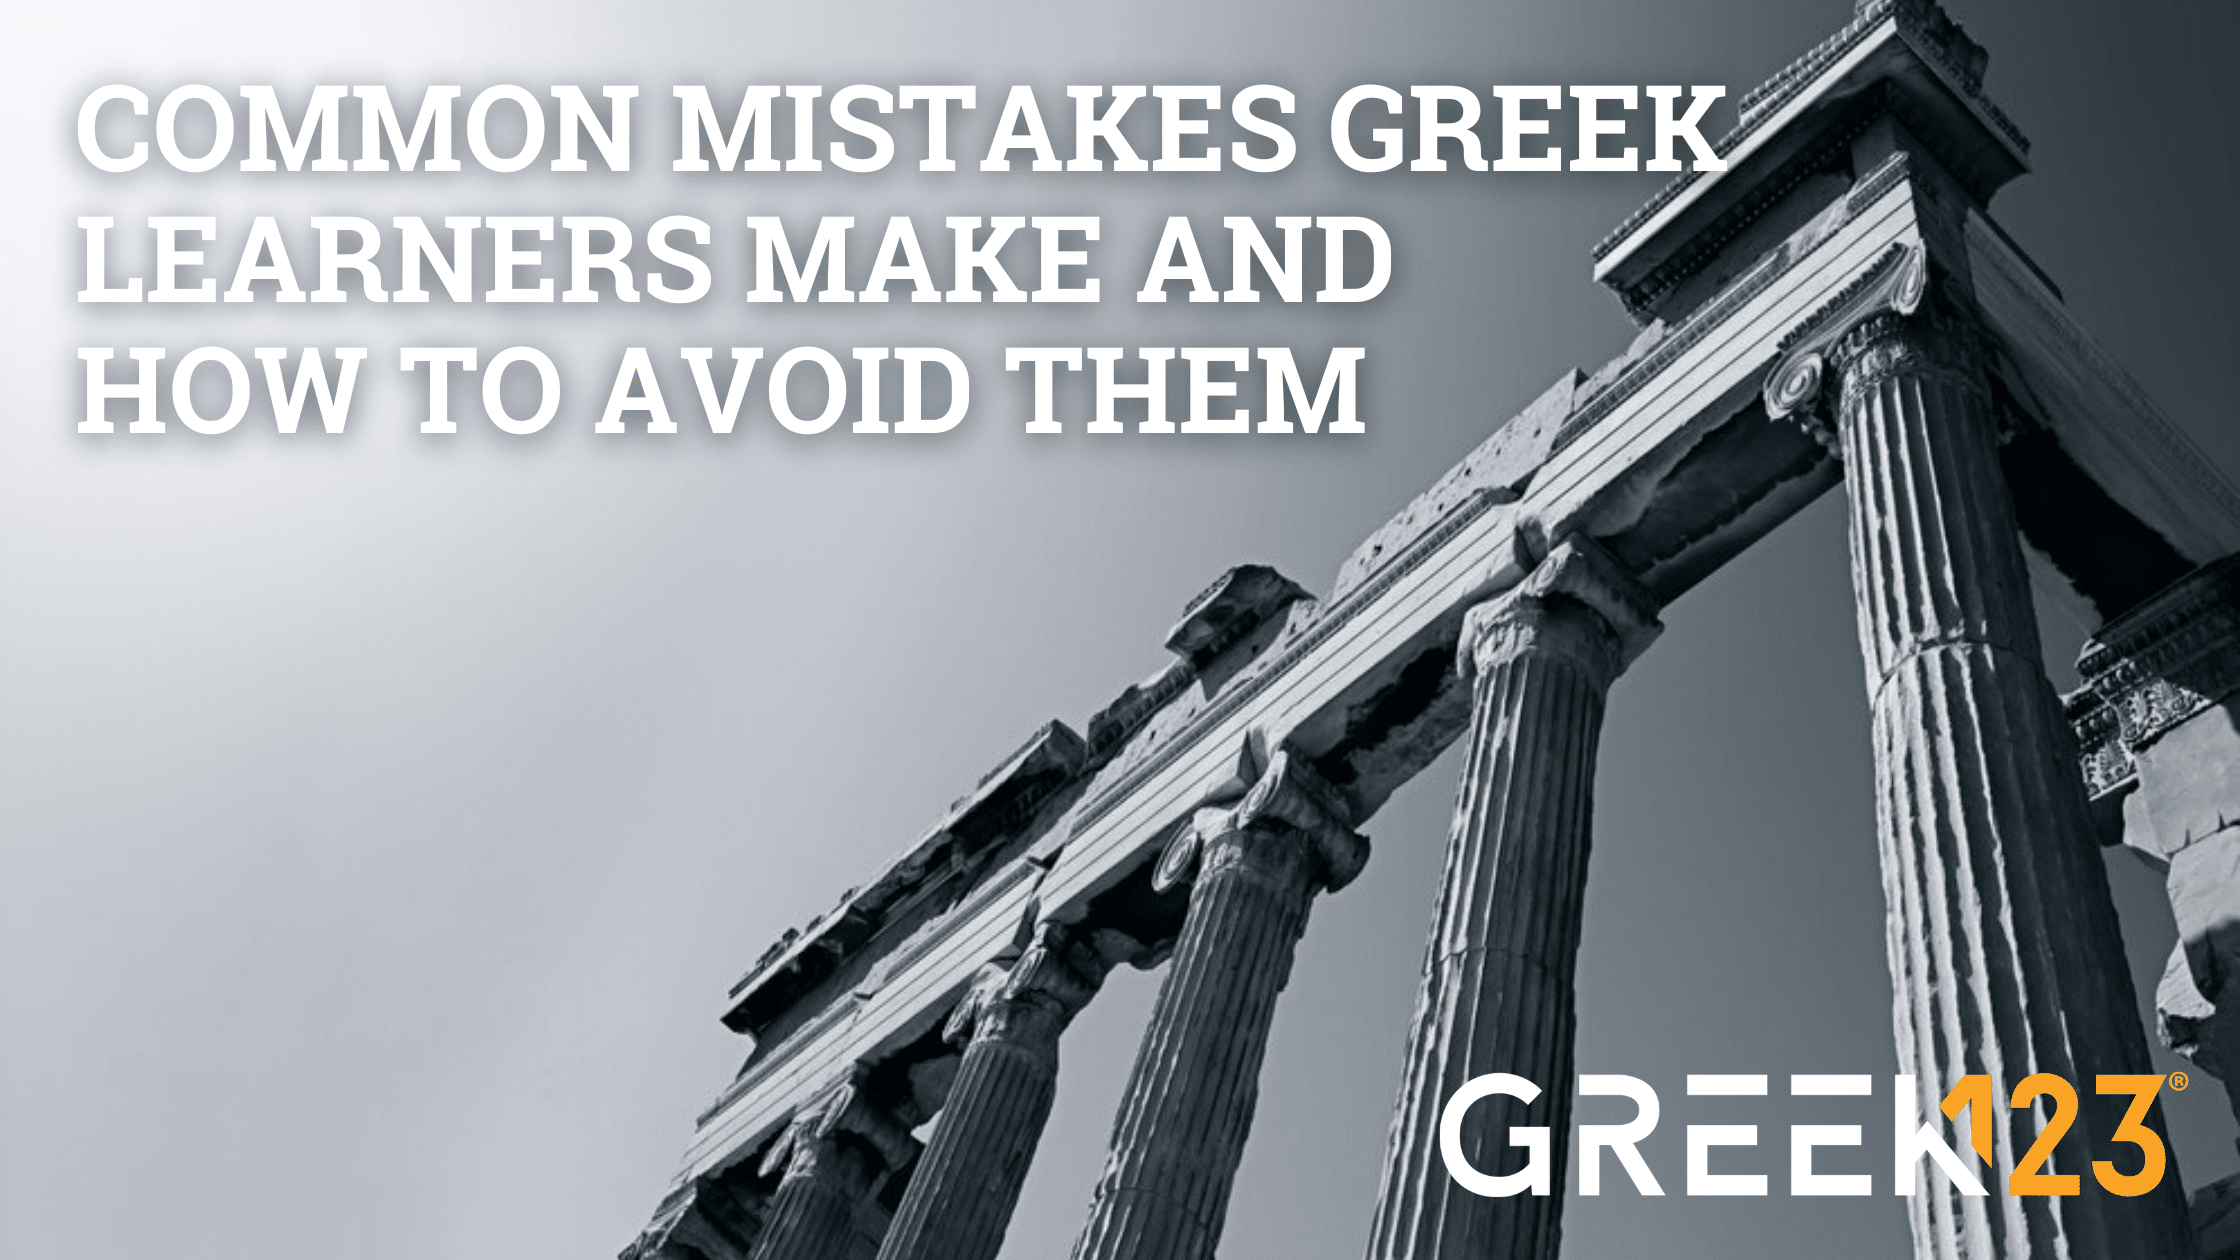 Common Mistakes Greek Learners Make and How to Avoid Them